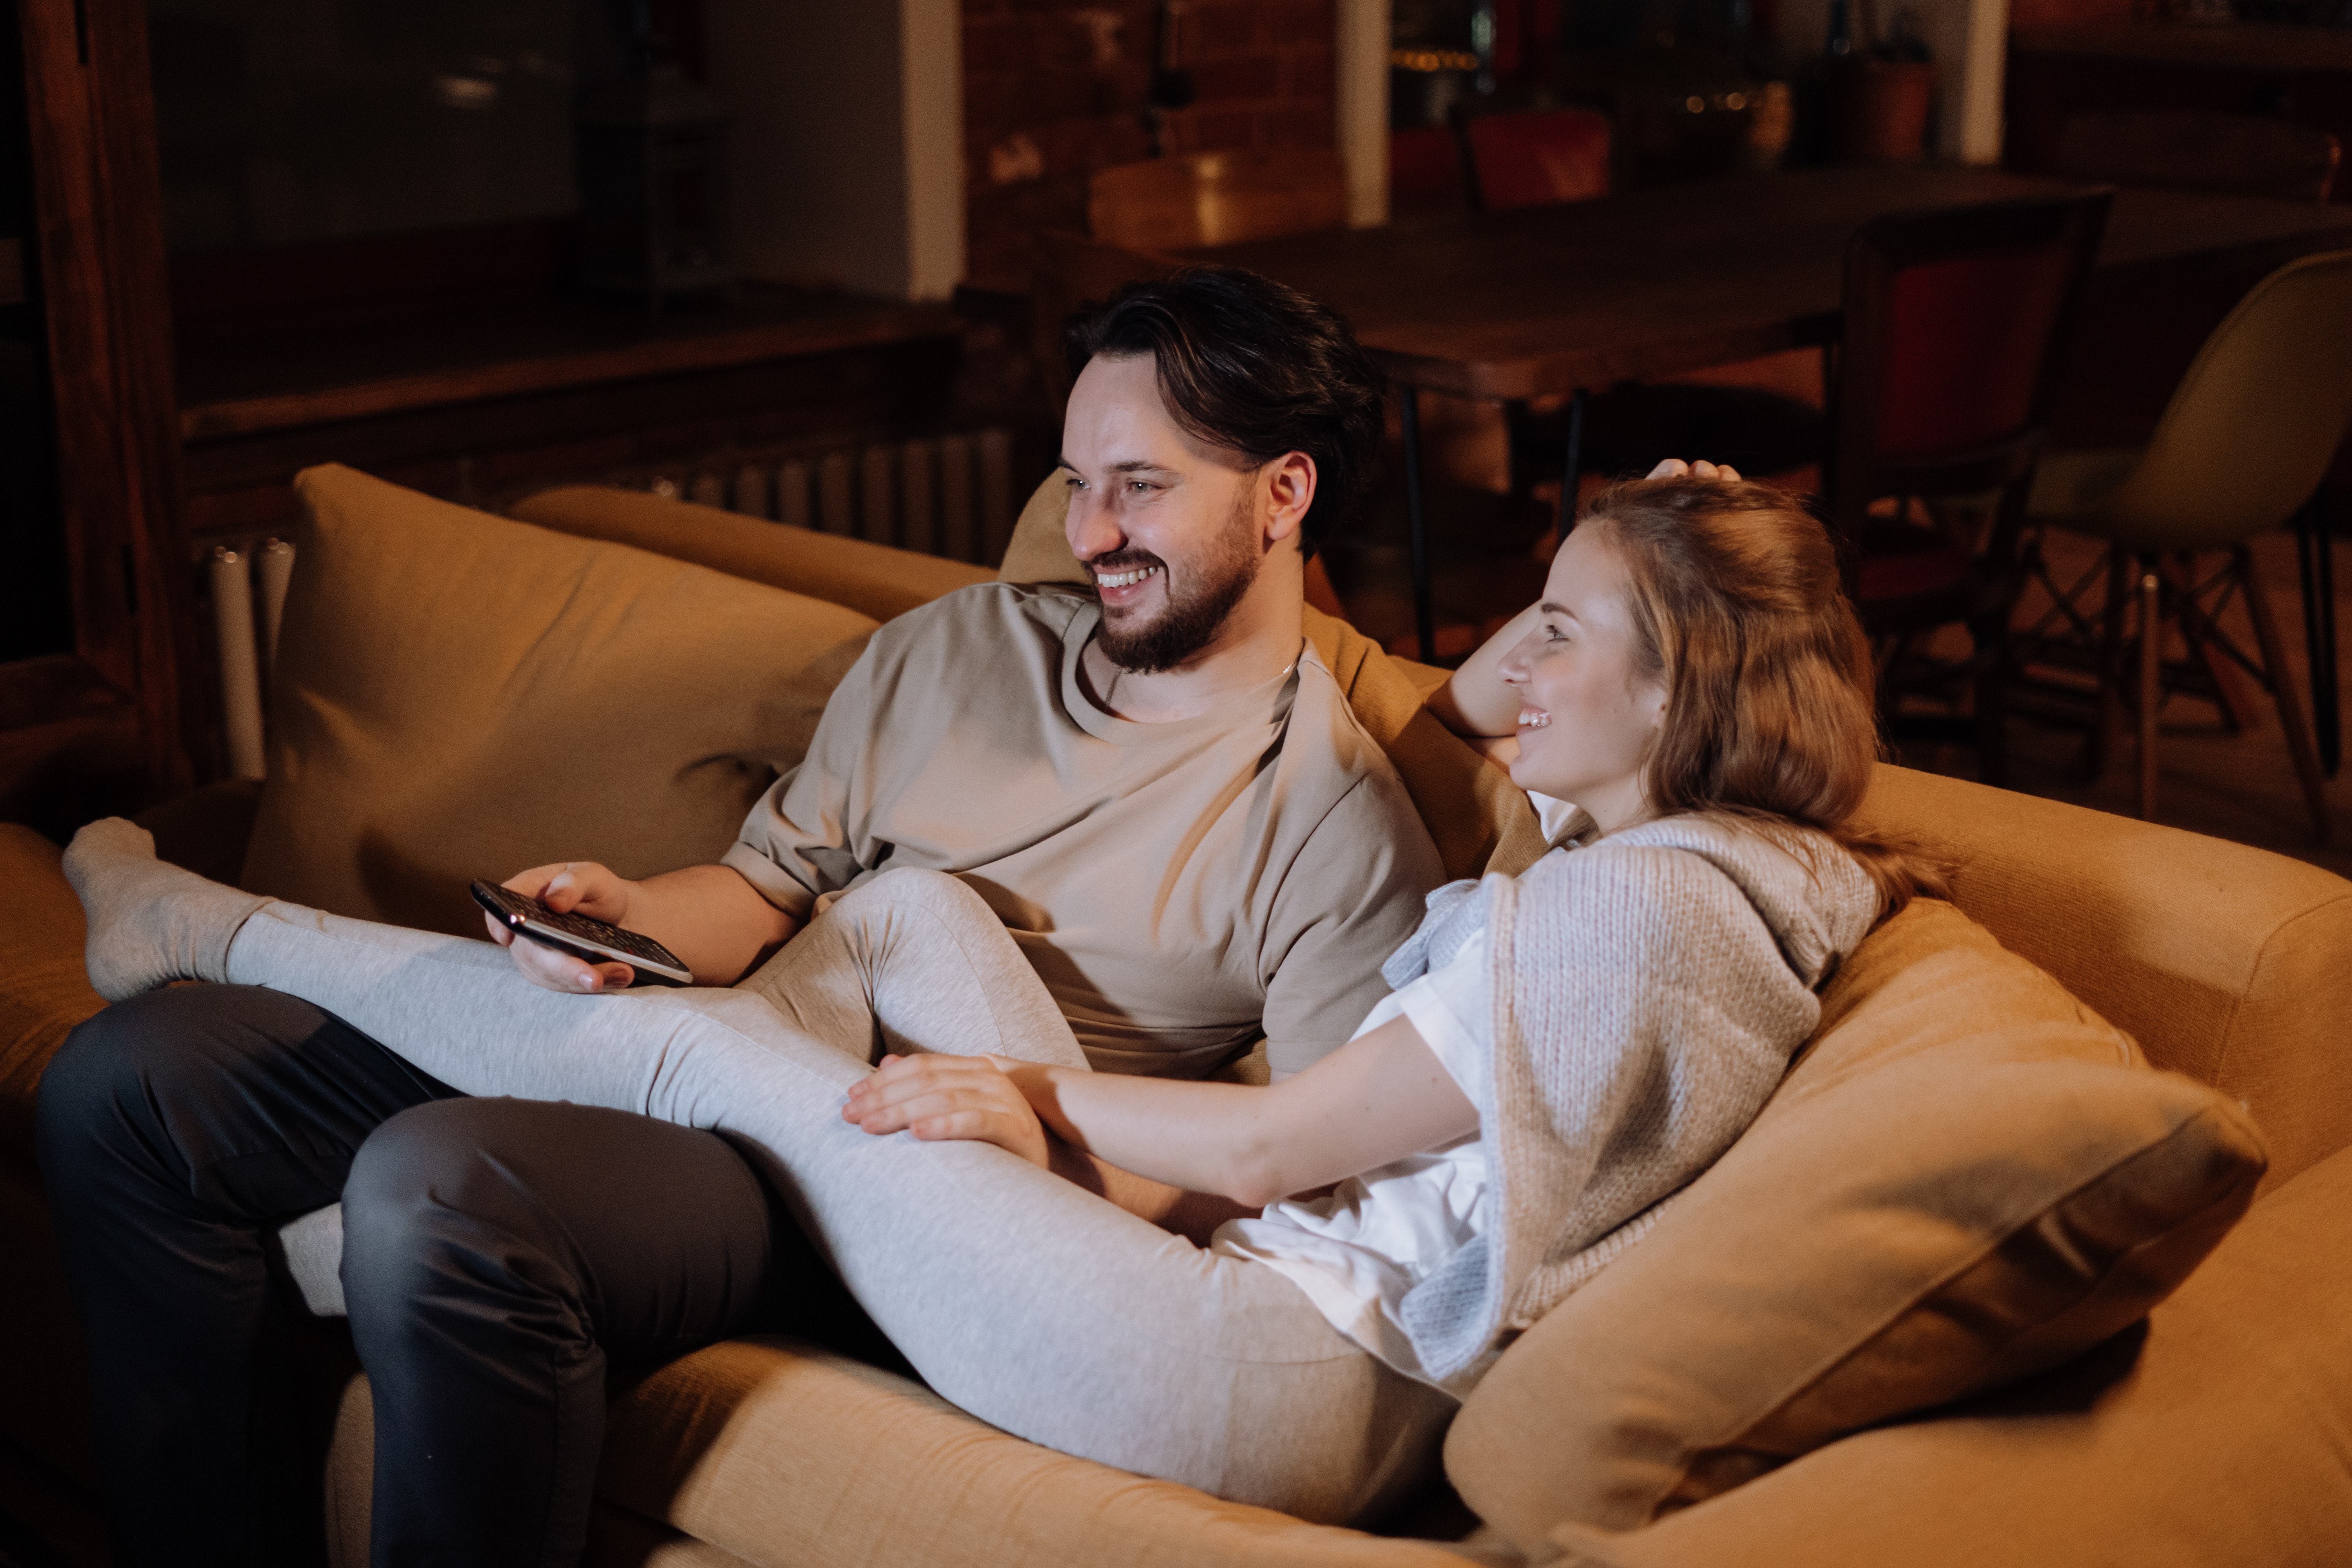 A couple watching TV while sitting on the couch | Source: Pexels